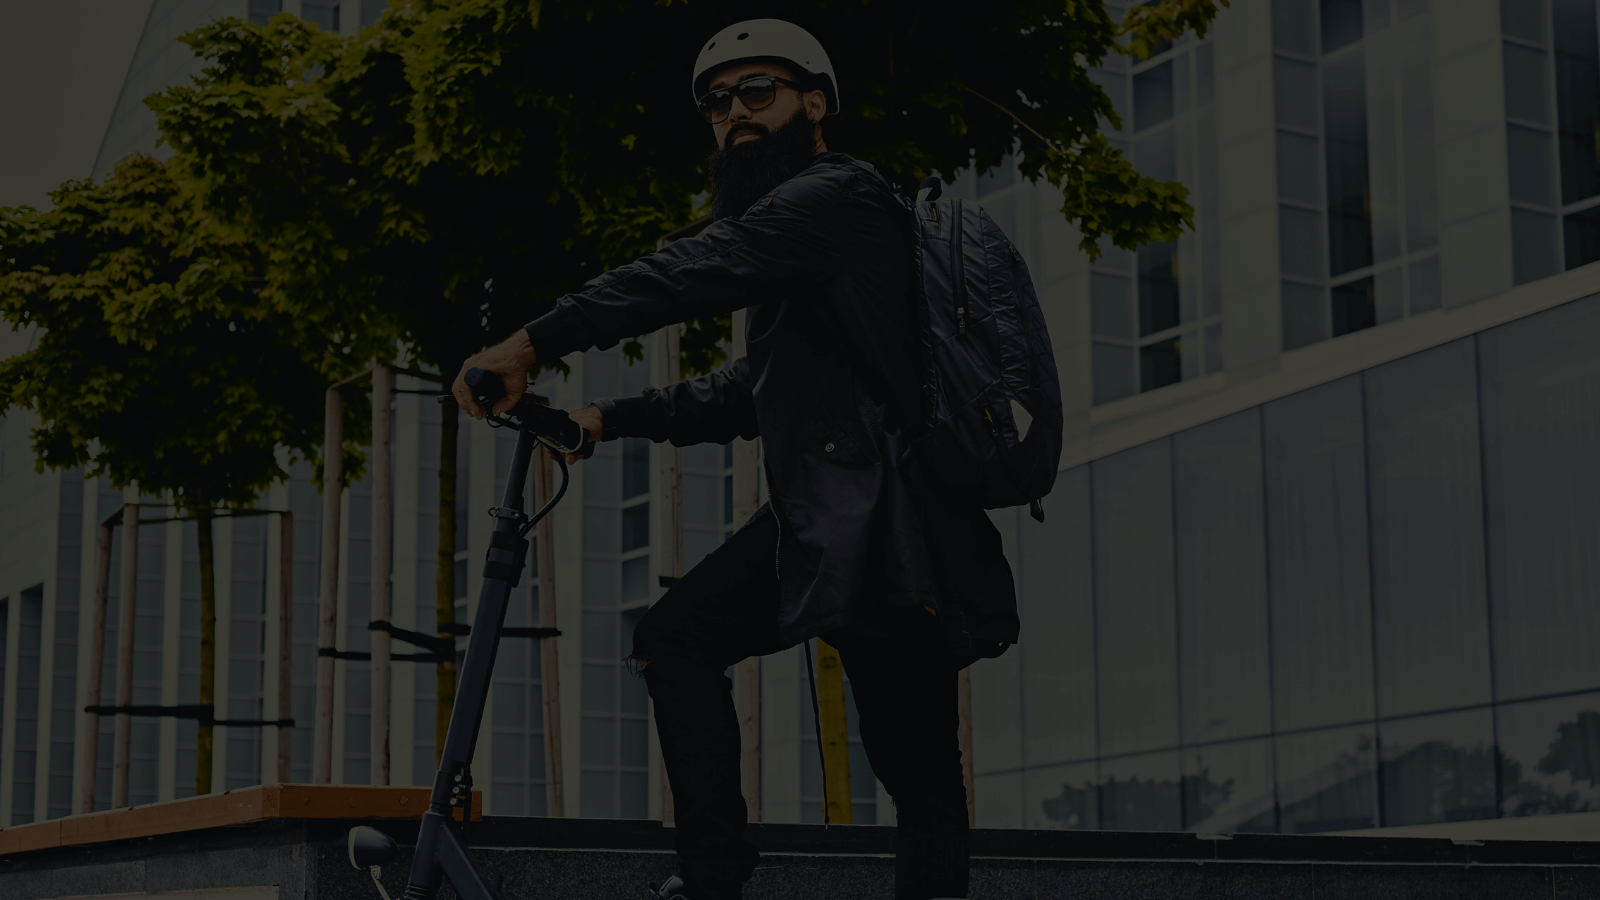 Austin pedestrians love the scooters but what will new regulation mean - Larrick Law Firm - Austin Texas